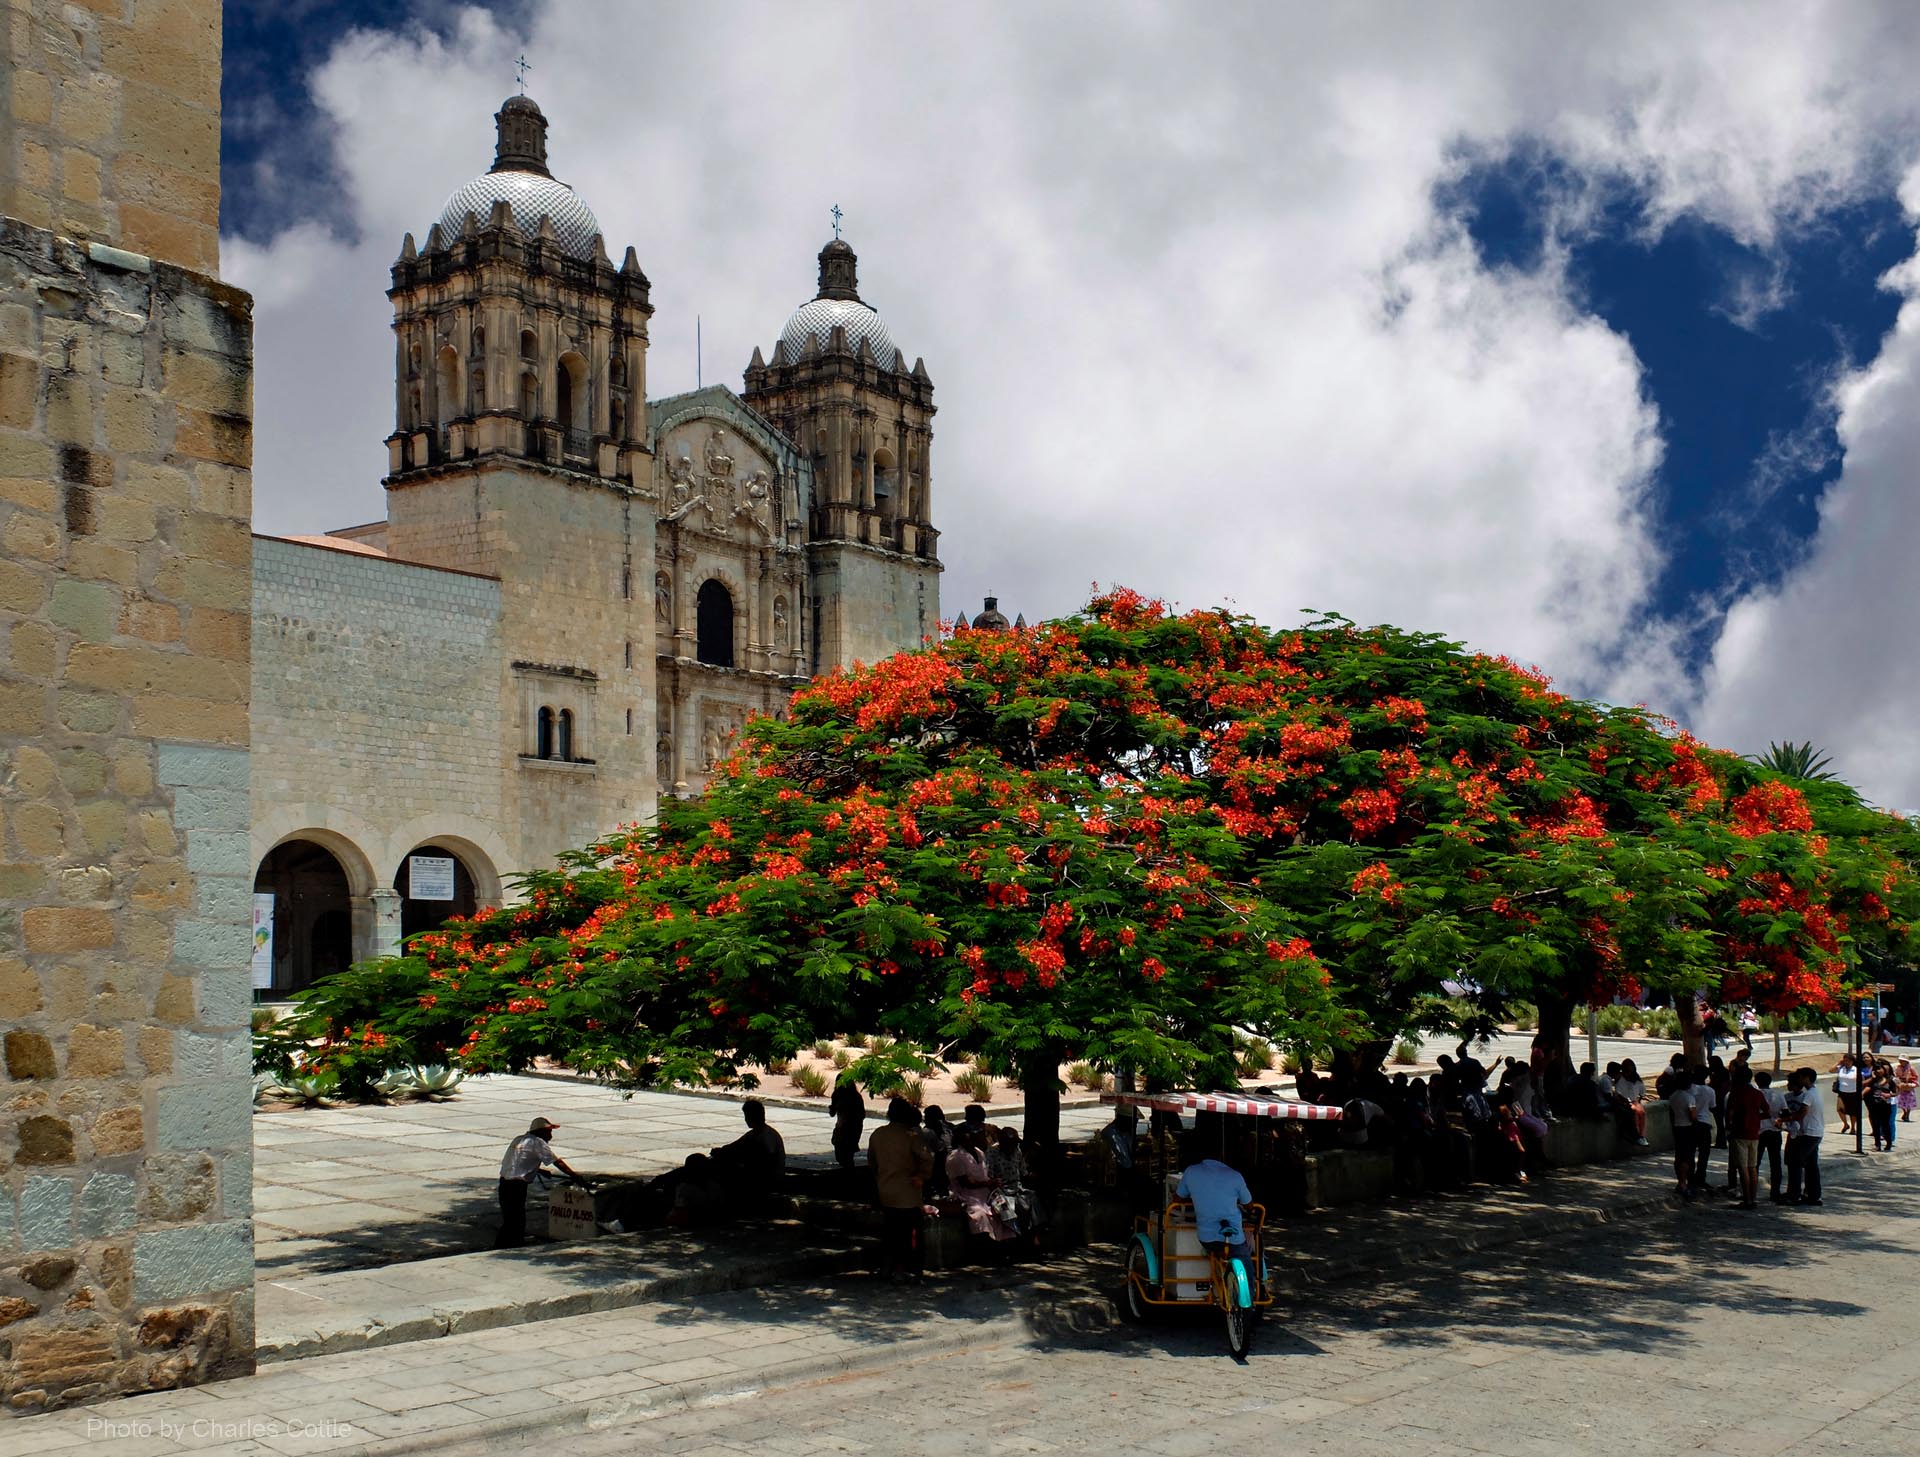 Flamboyant tree with orange blossoms in front of Santo Domingo church.